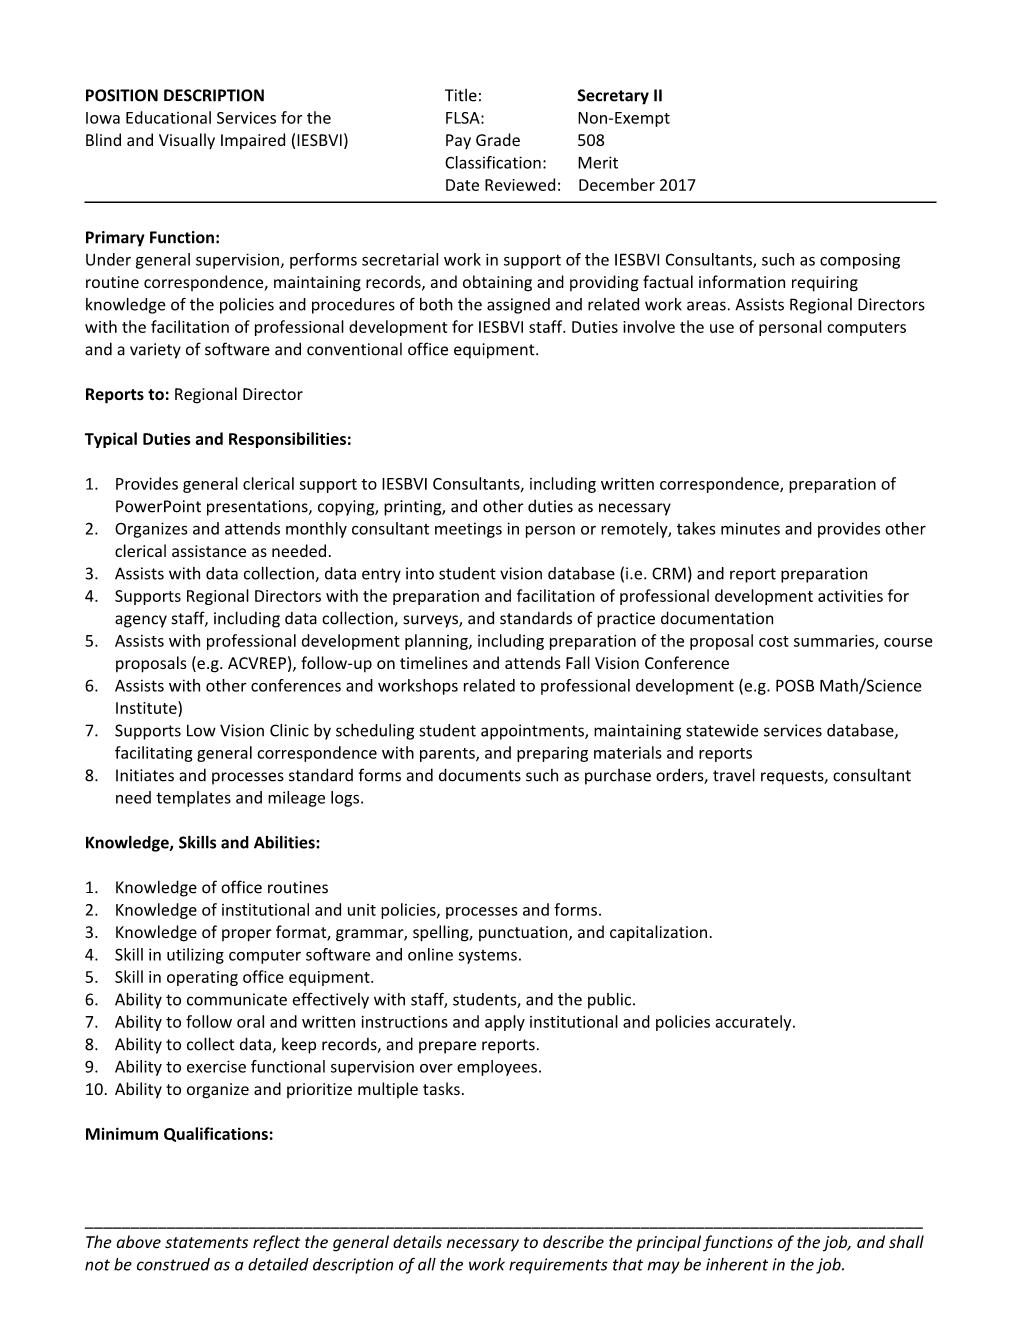 IESBVI Position Description Transition and Family Services Consultant - Page 1 of 2